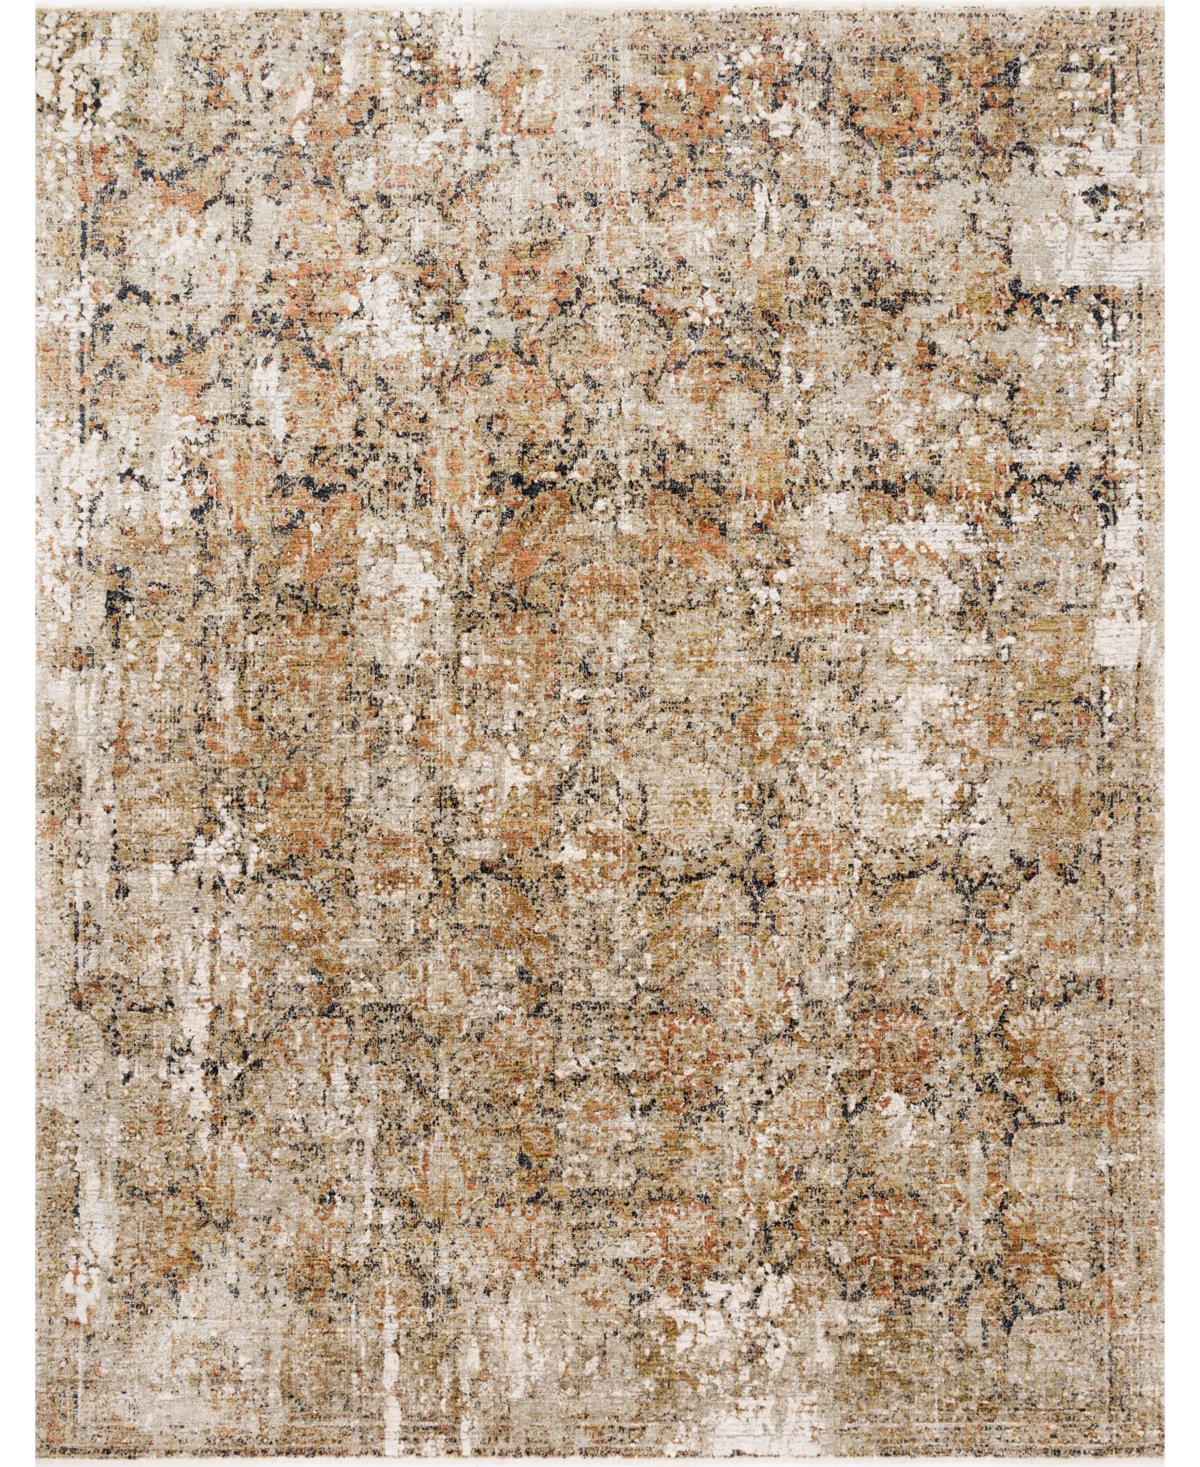 Spring Valley Home Bree Bre-02 2' X 3'7" Area Rug In Taupe/gold Tone